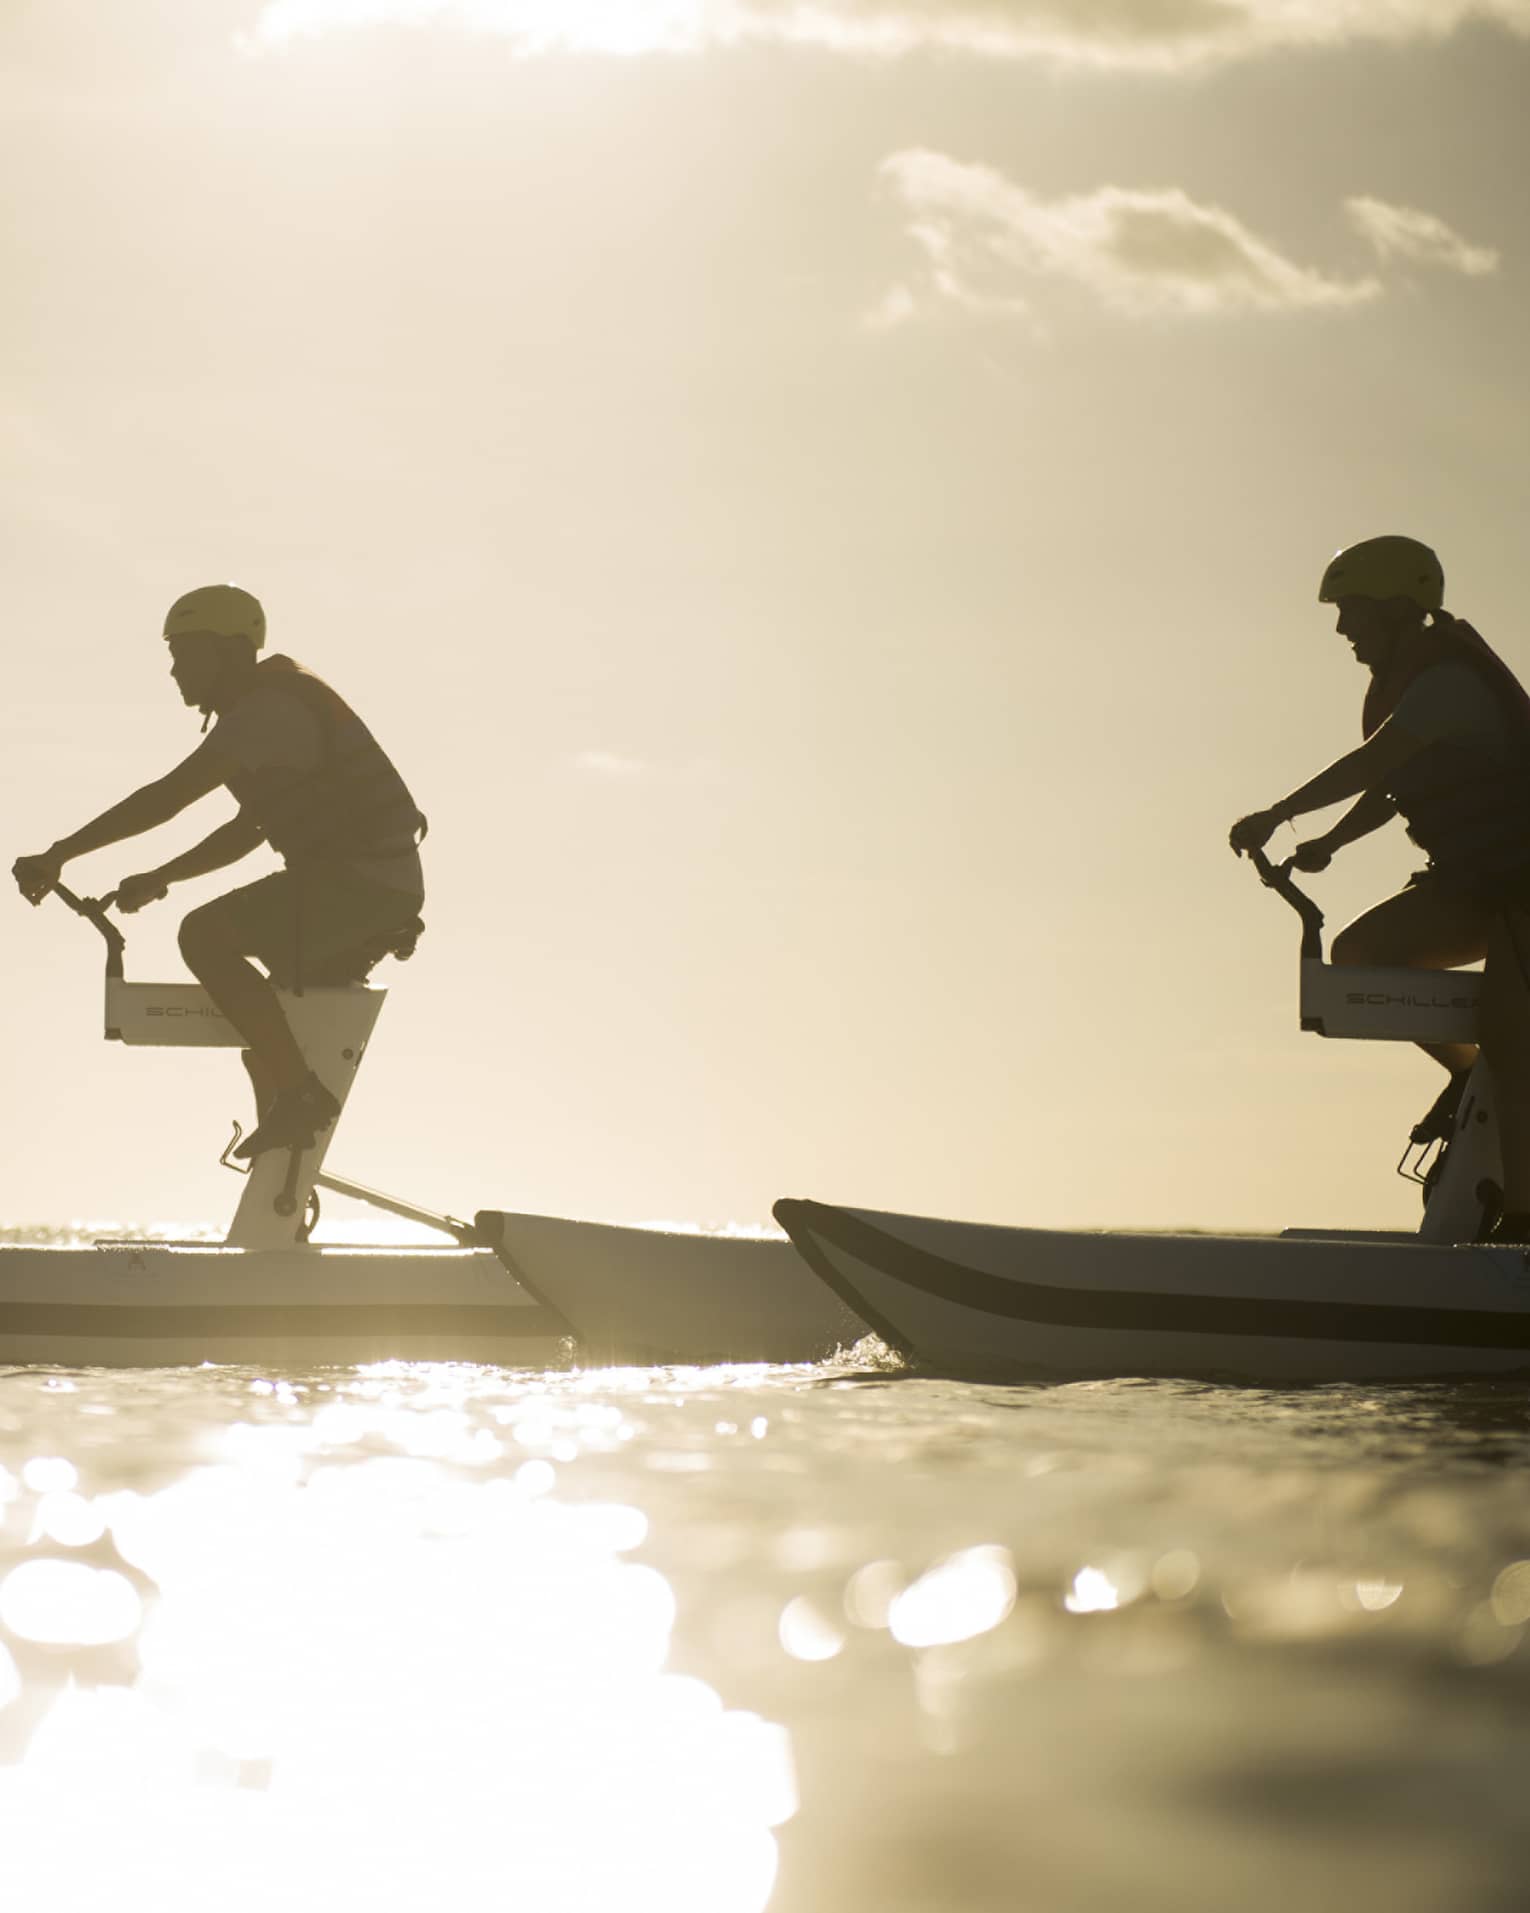 Silhouettes of two men riding aquatic bicycles on ocean at sunset